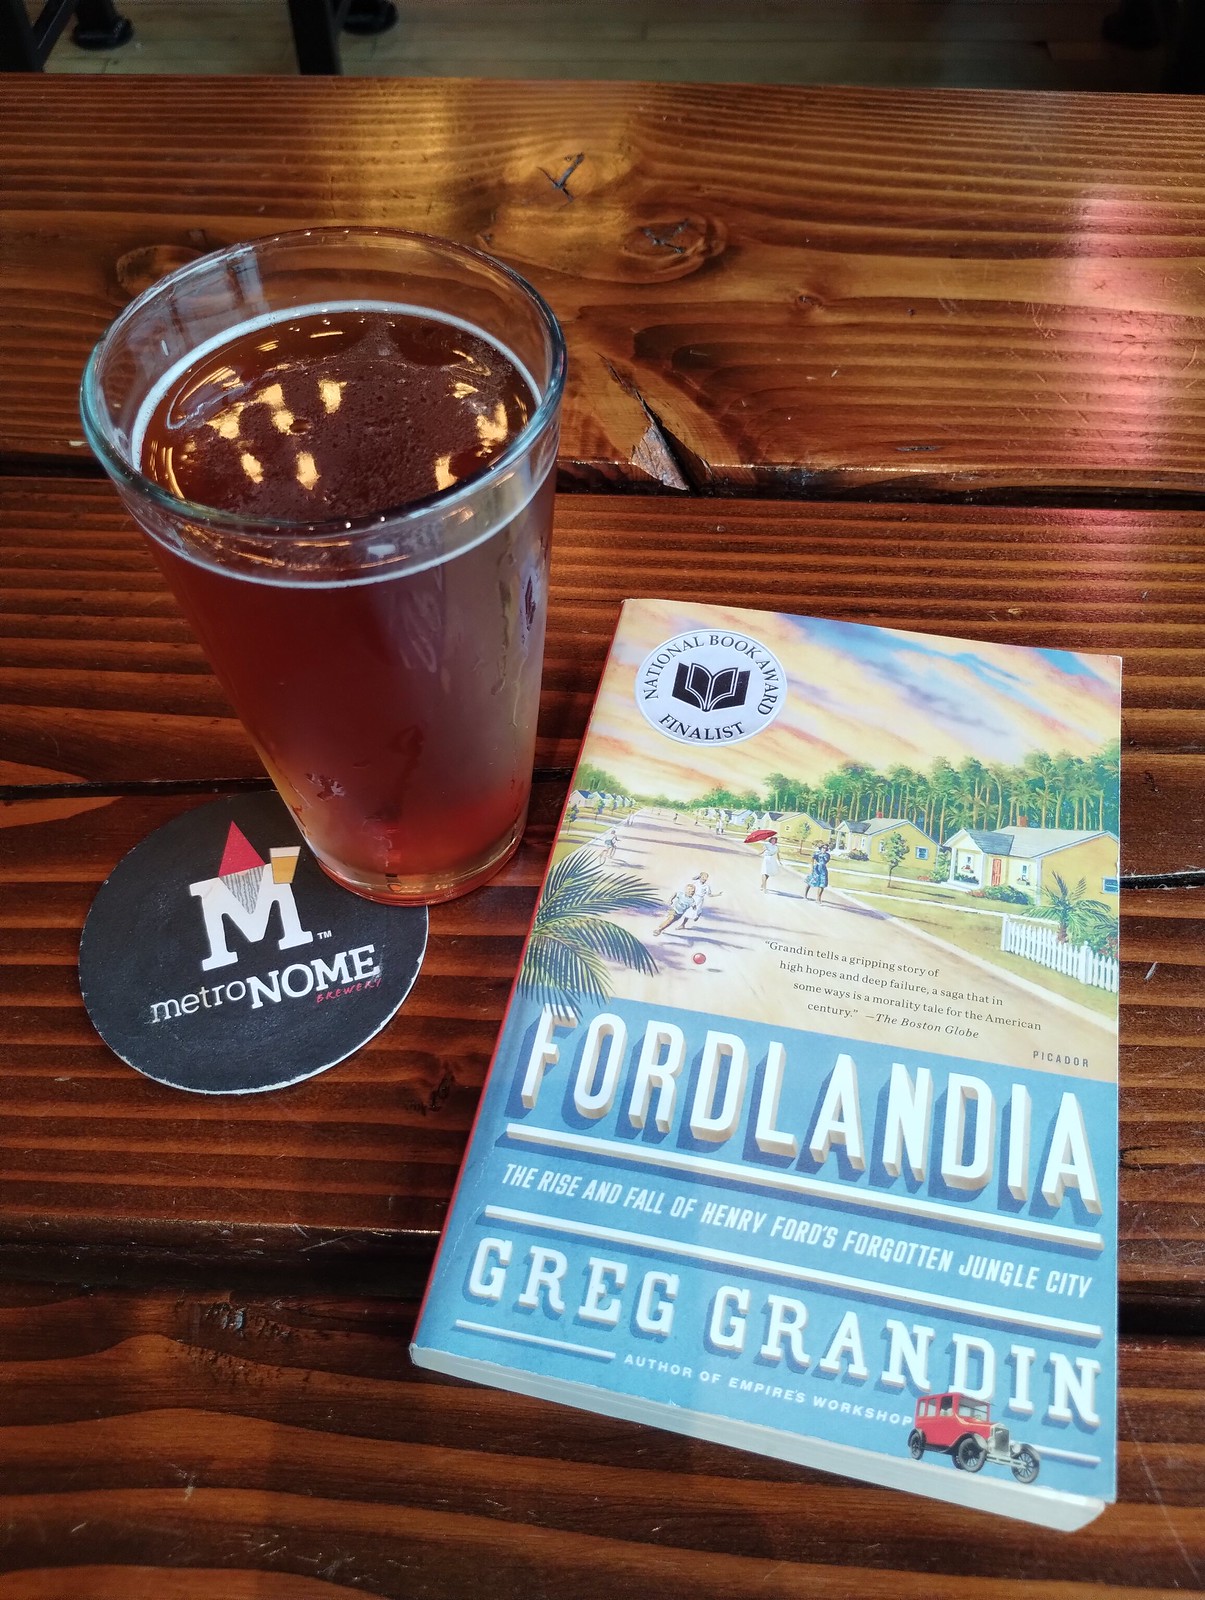 Metronome Beer and Fordlandia by: